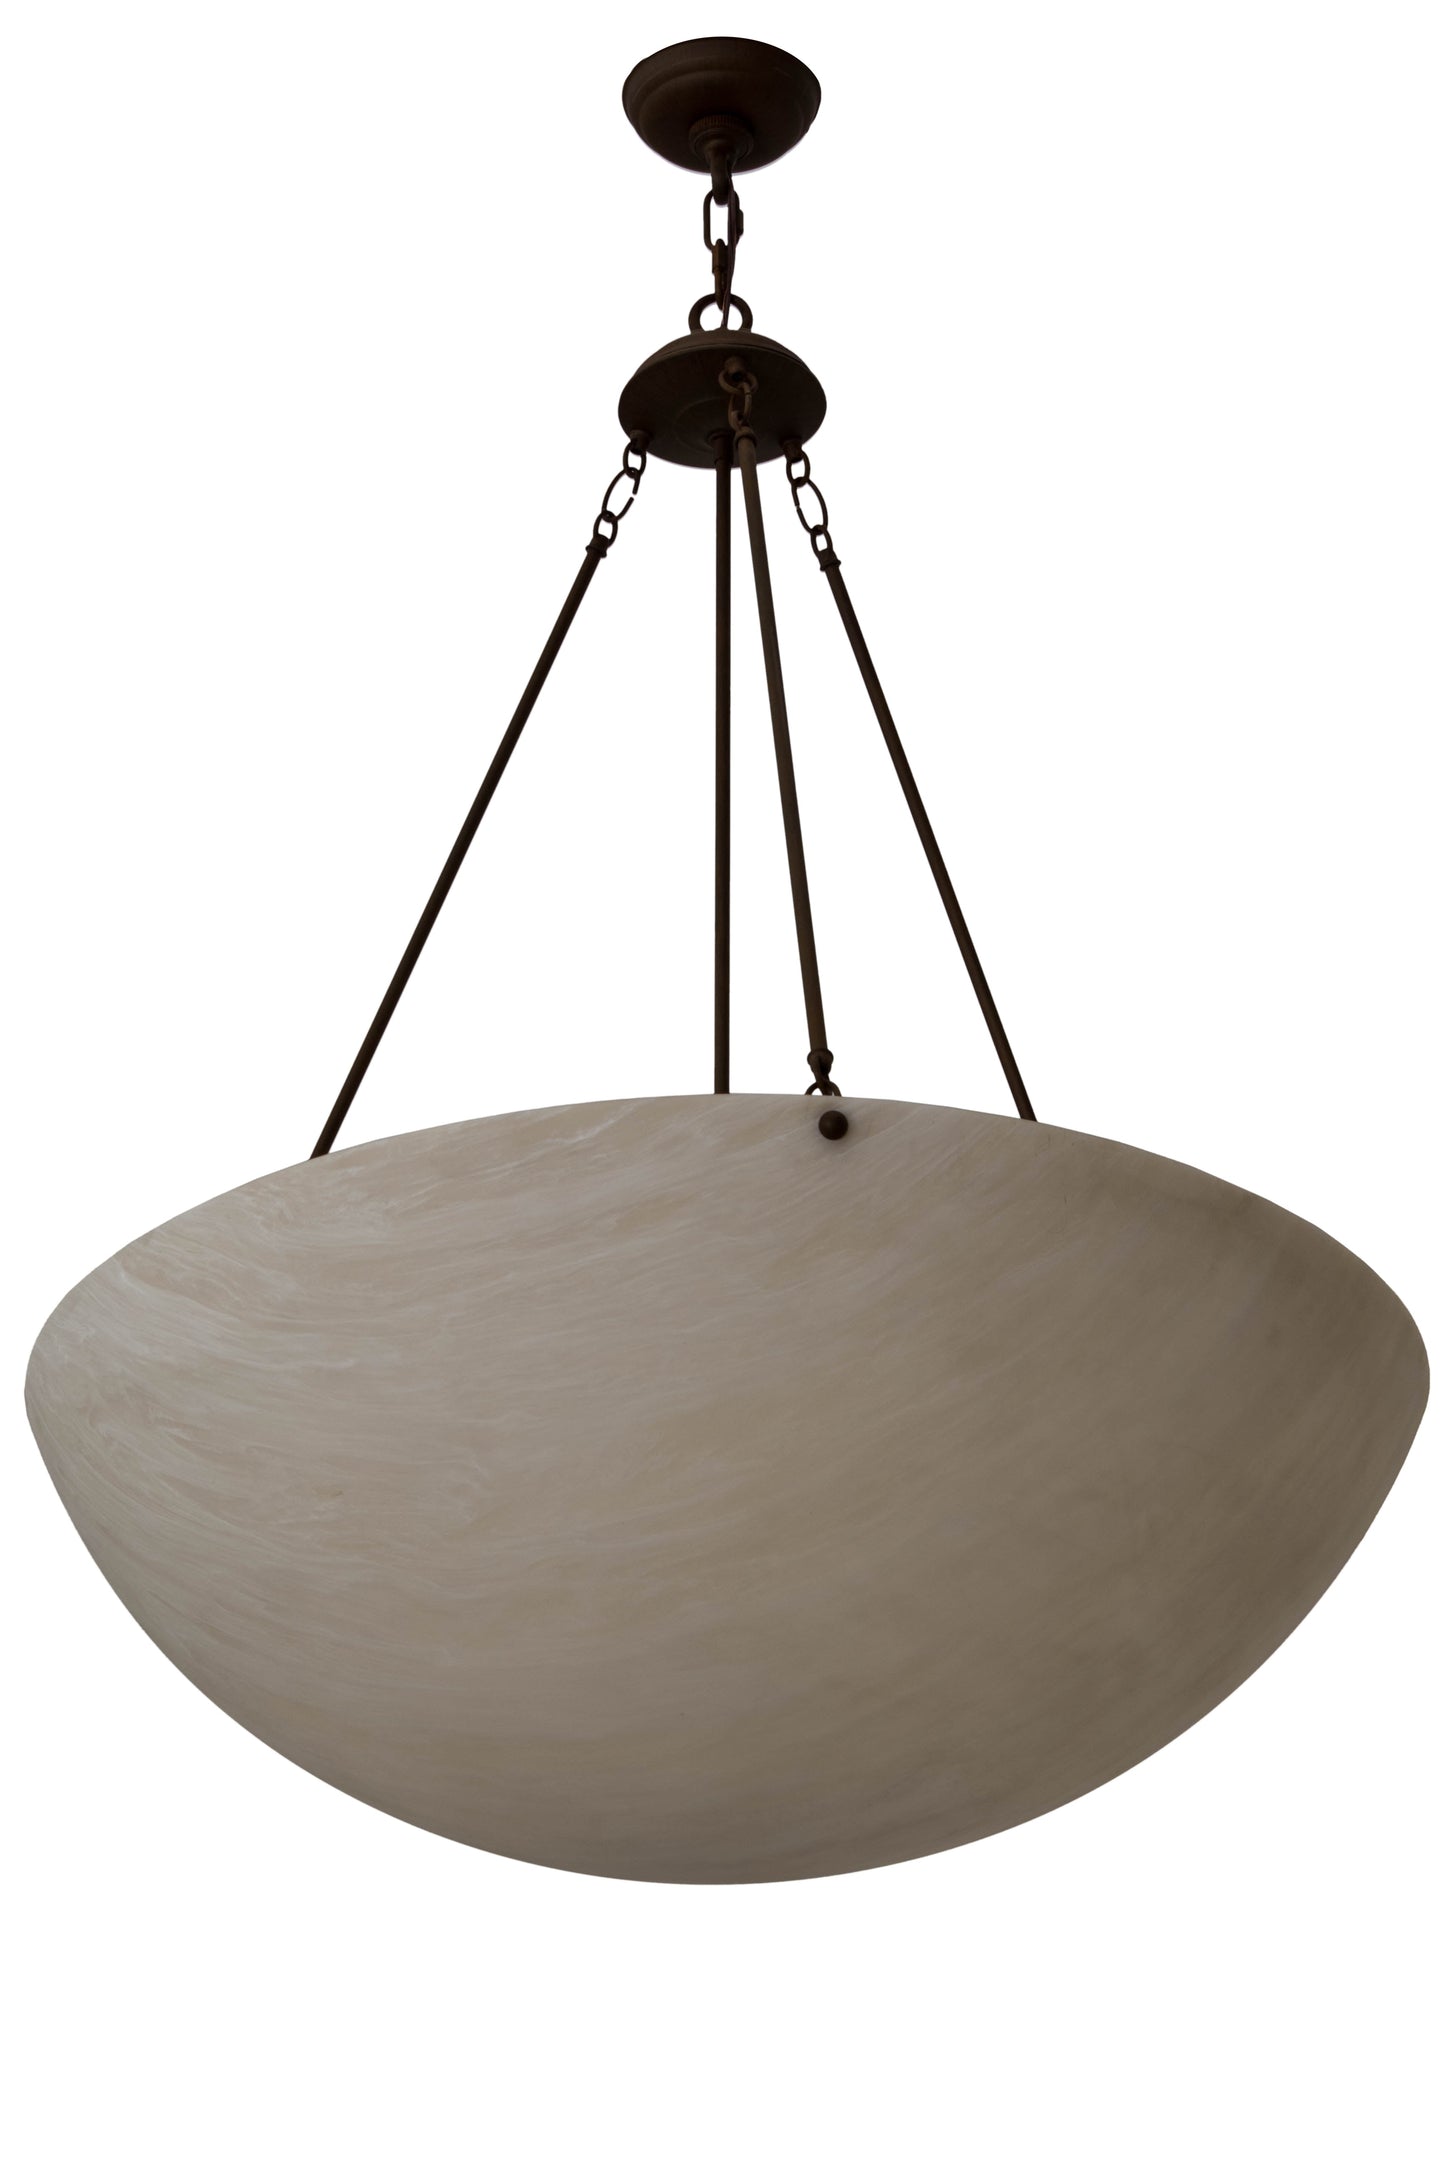 32" Rio Inverted Pendant by 2nd Ave Lighting